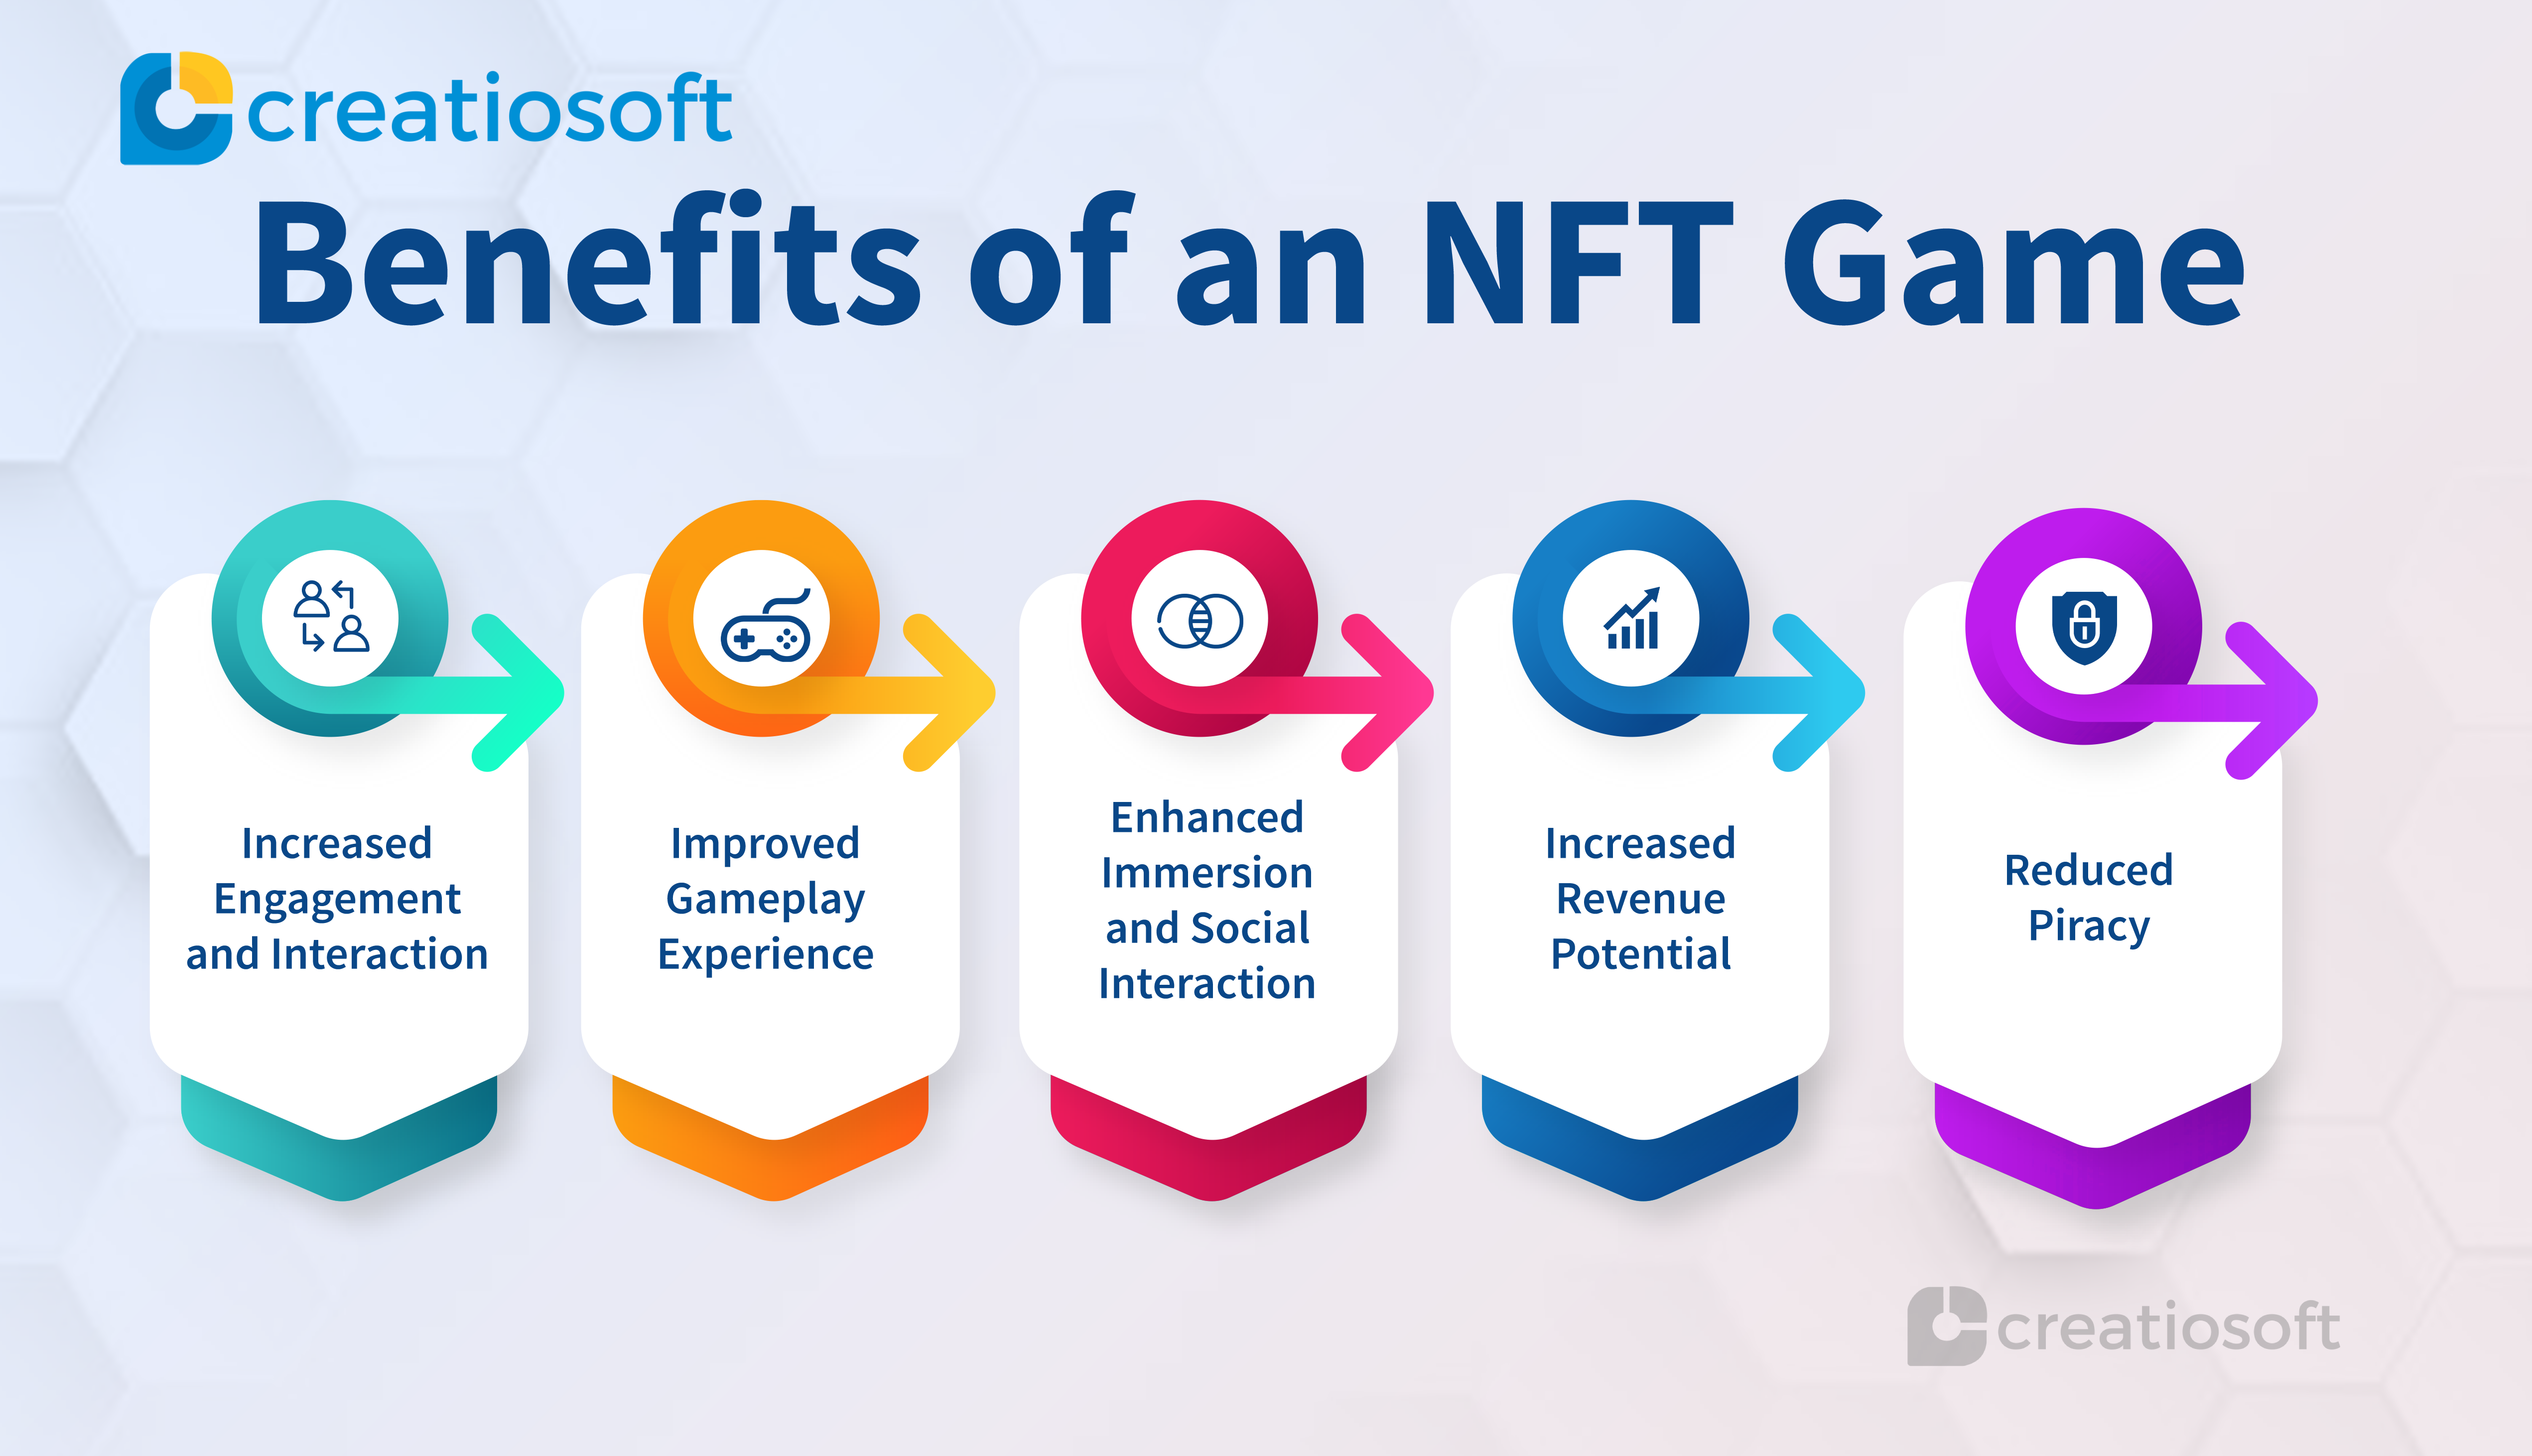 Benefits of NFT Game